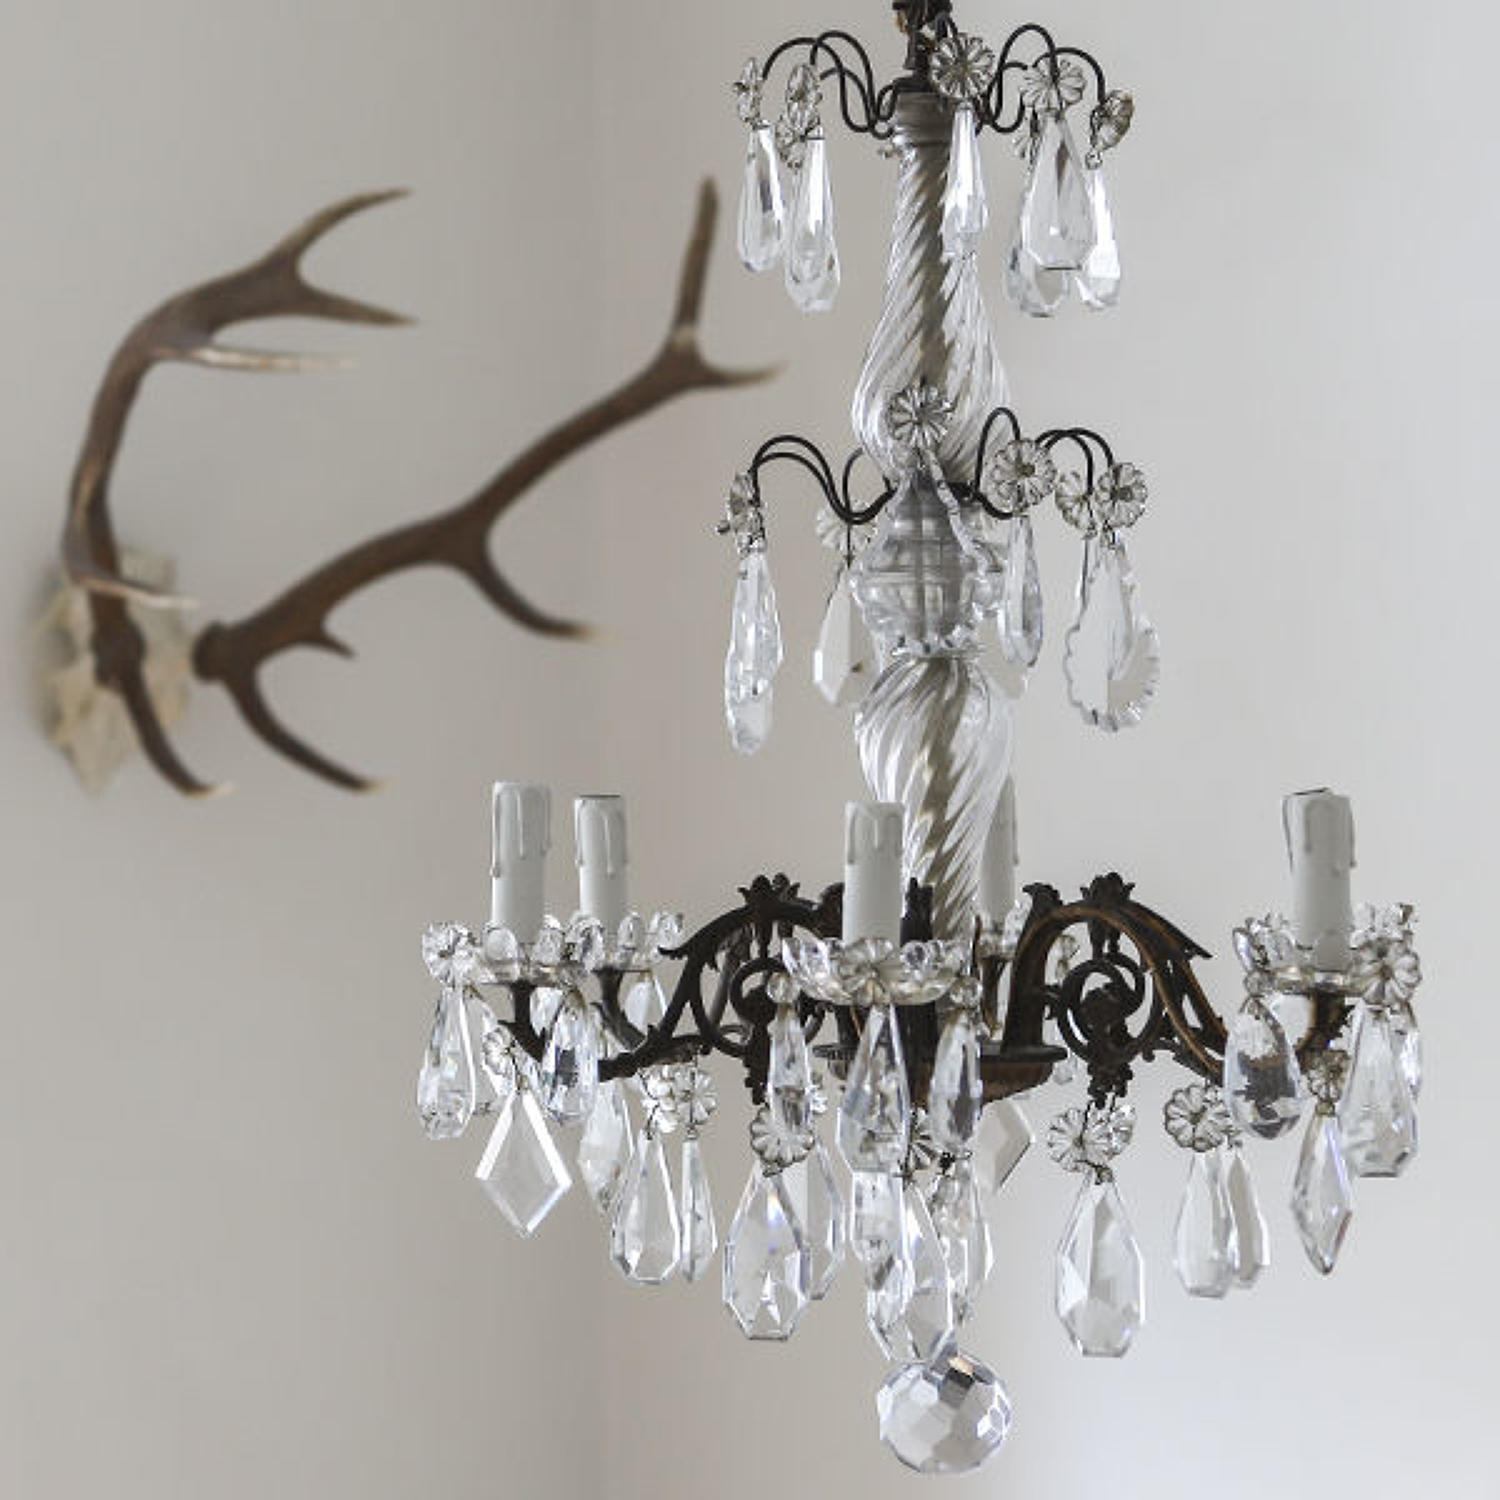 19th century French antique crystal chandelier